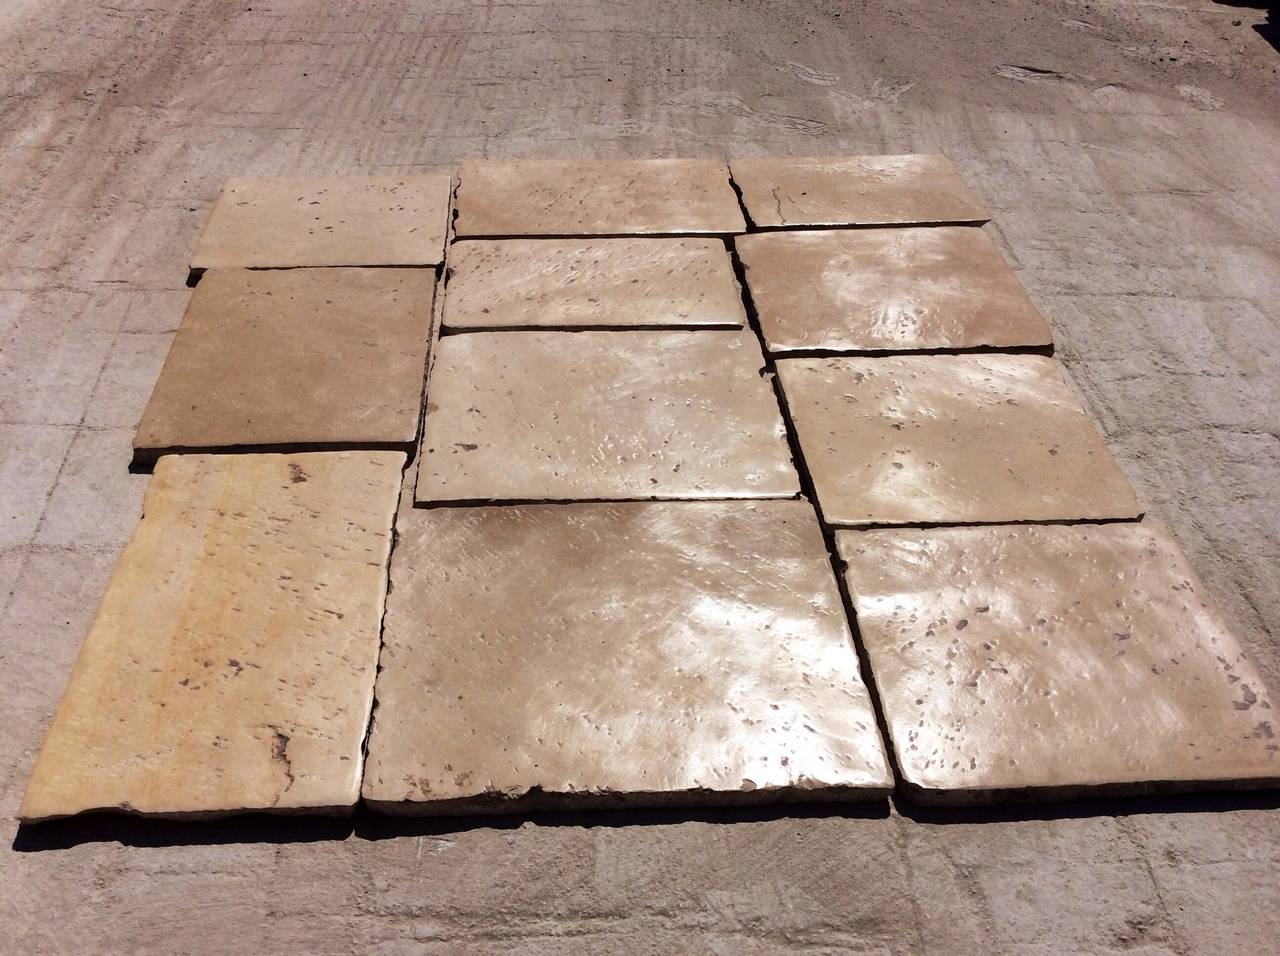 Antique Reclaimed French Stone Floors,( second  cut )  Dalles De Bourgogne )18th Century random size ( Opus Roman), recycled stone floors,  Large Stock For Sale in Warhouse in wooden crates fumigate in accorda ce wi th USA, by LUCIANO AMATO since